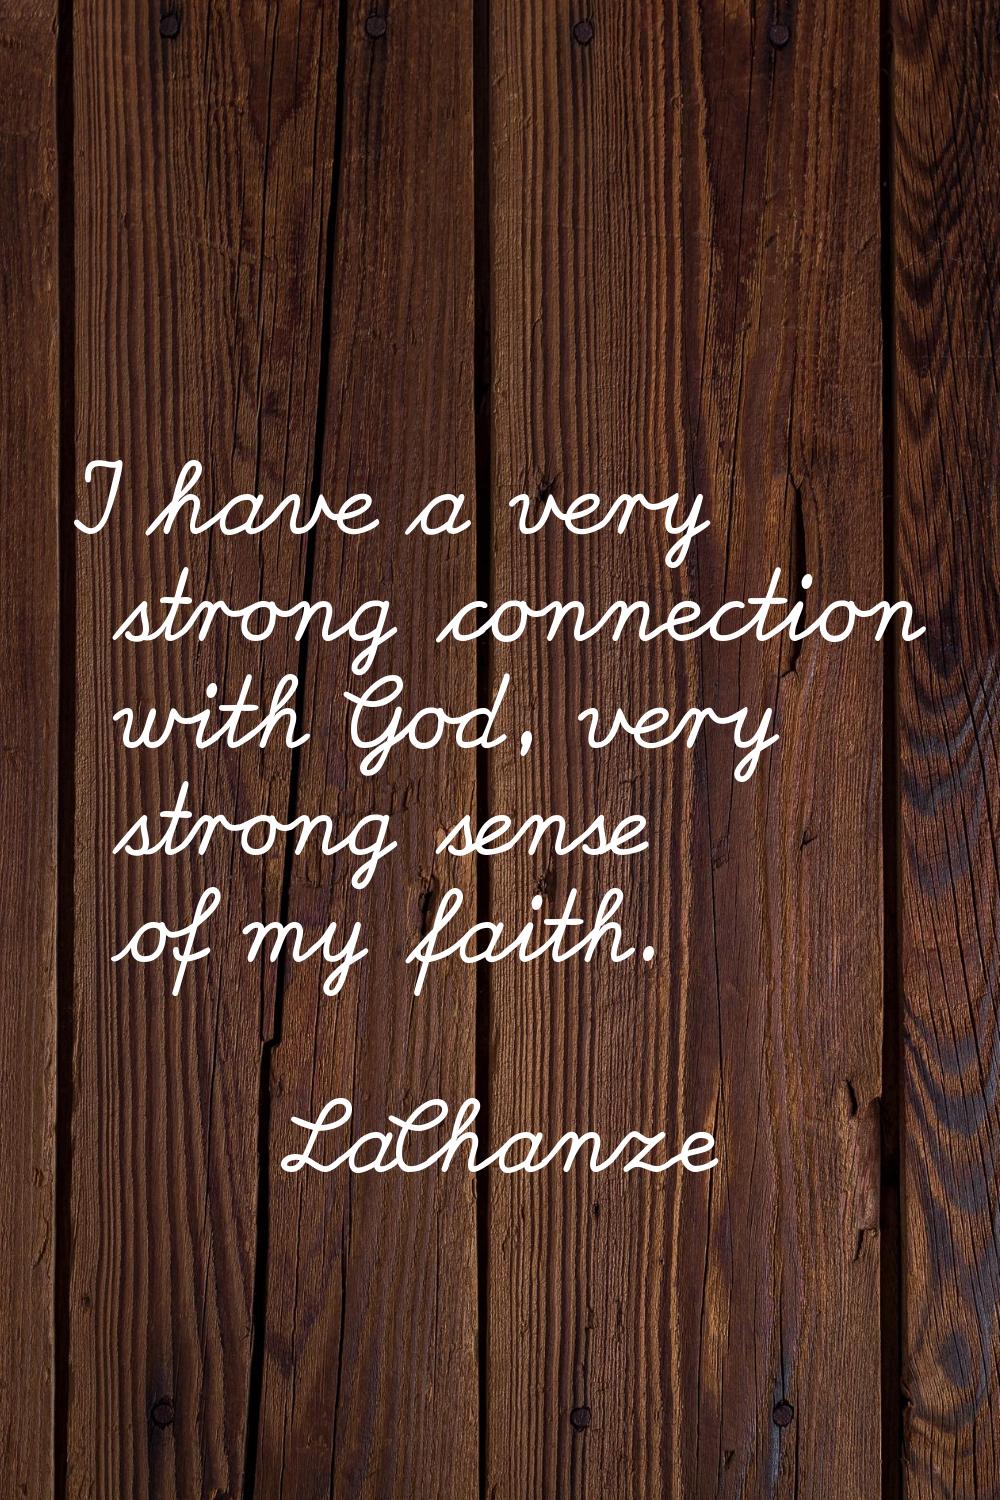 I have a very strong connection with God, very strong sense of my faith.